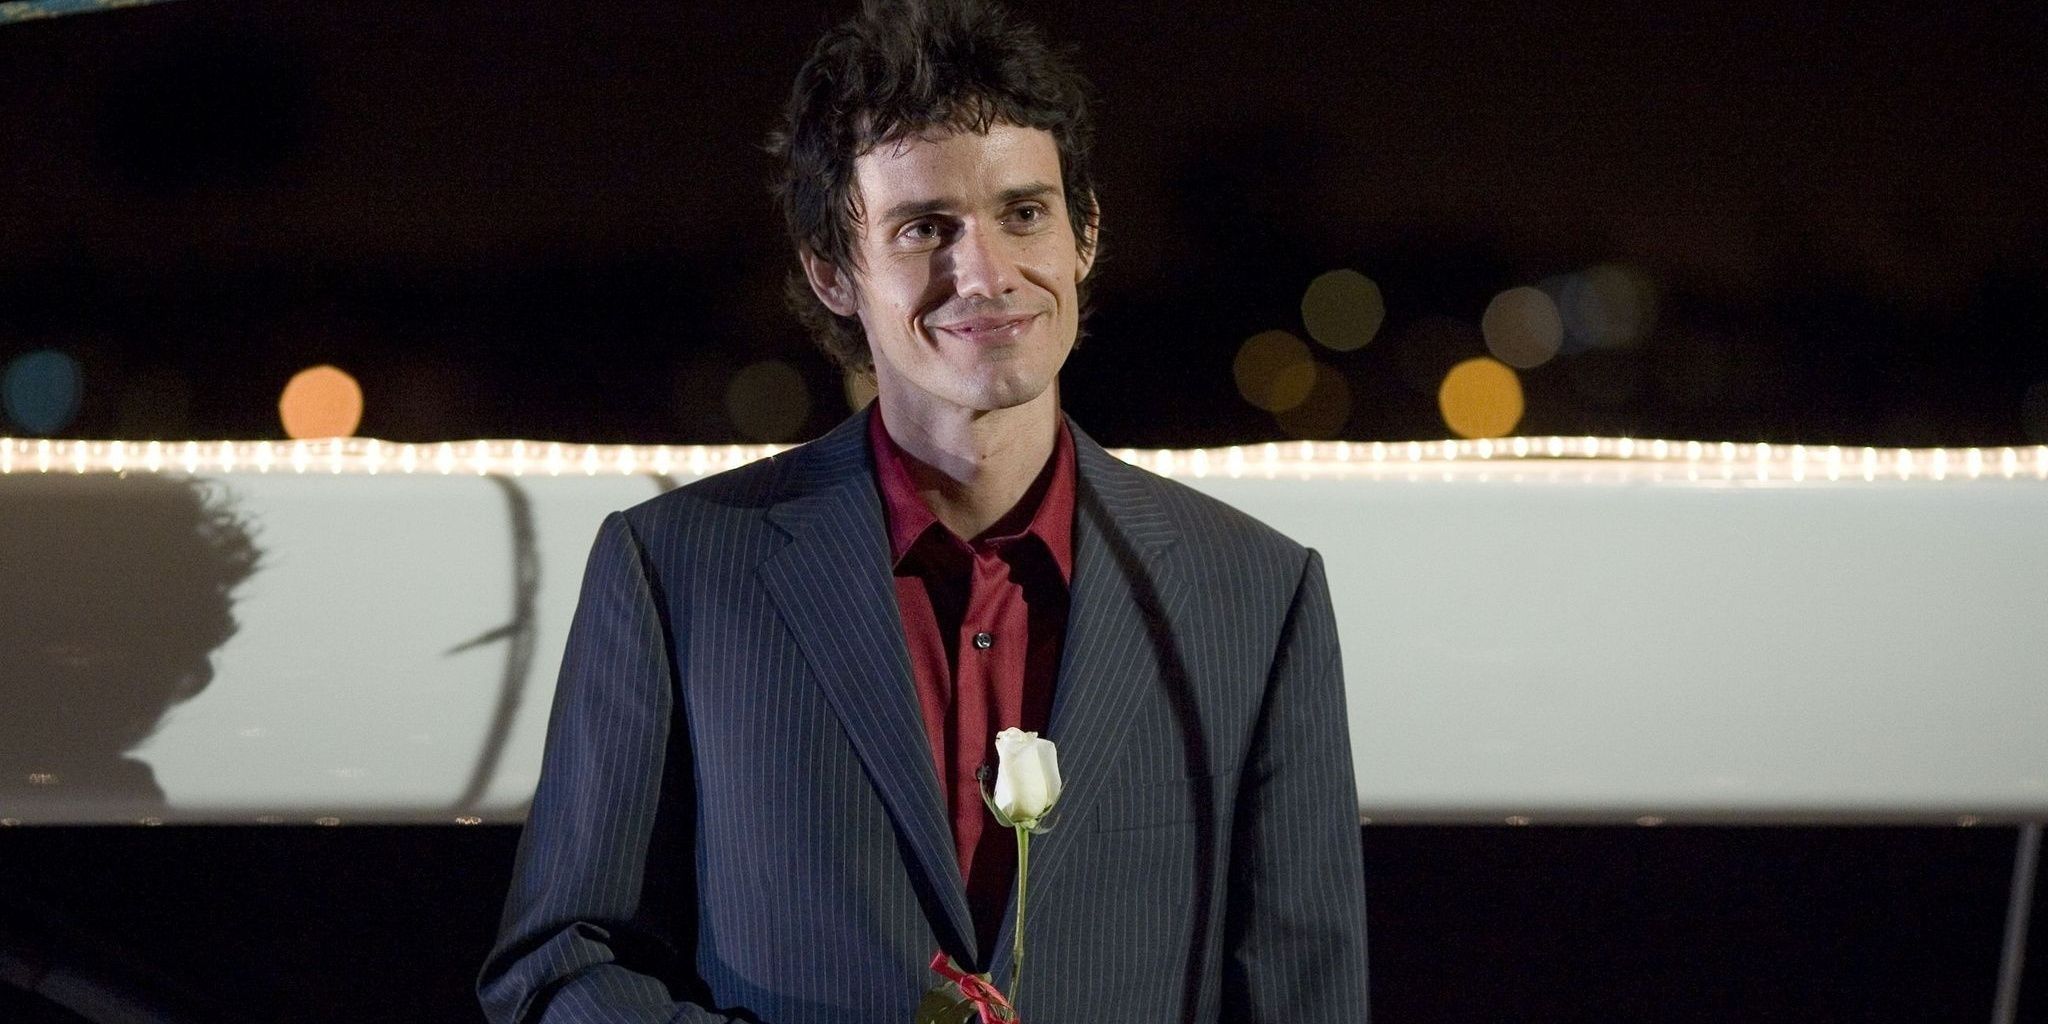 Christian Camargo as Rudy wearing a tuxedo and smiling